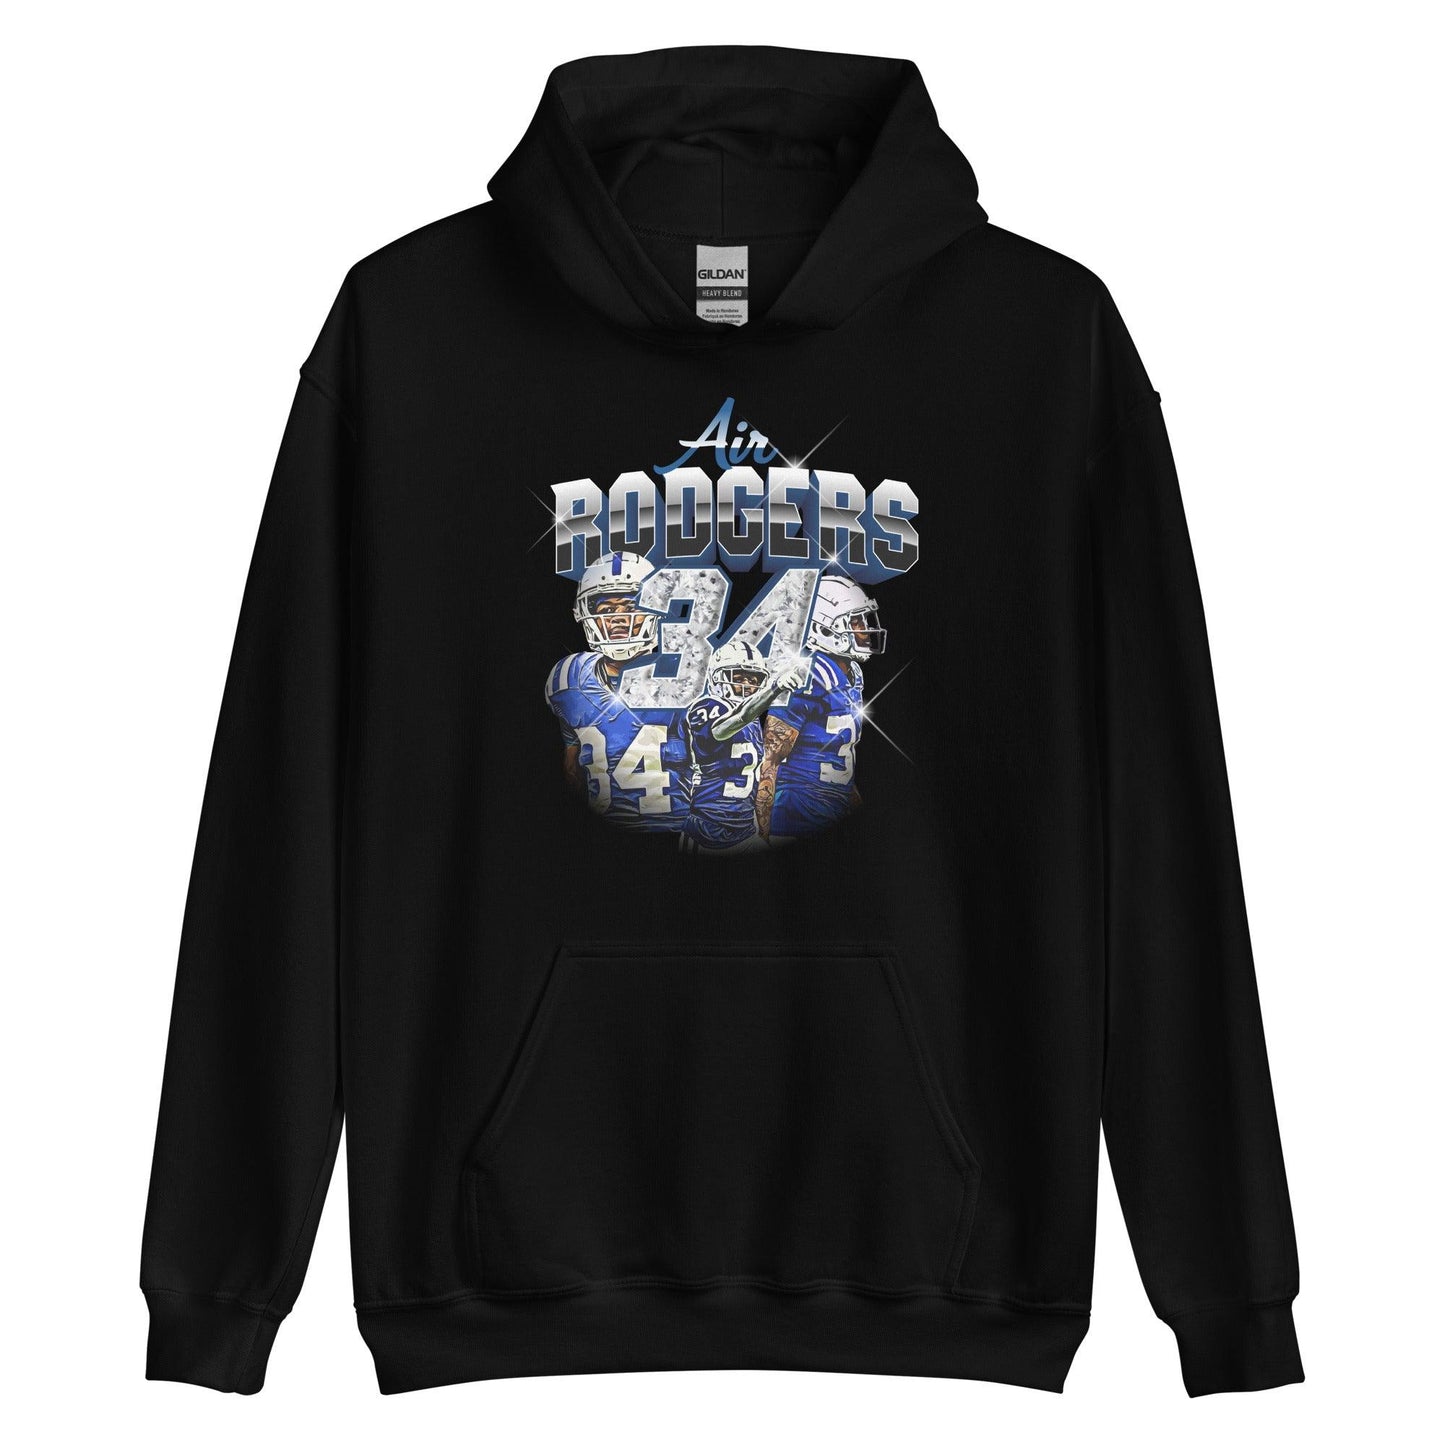 Isaiah Rodgers "Limited Edition" Hoodie - Fan Arch